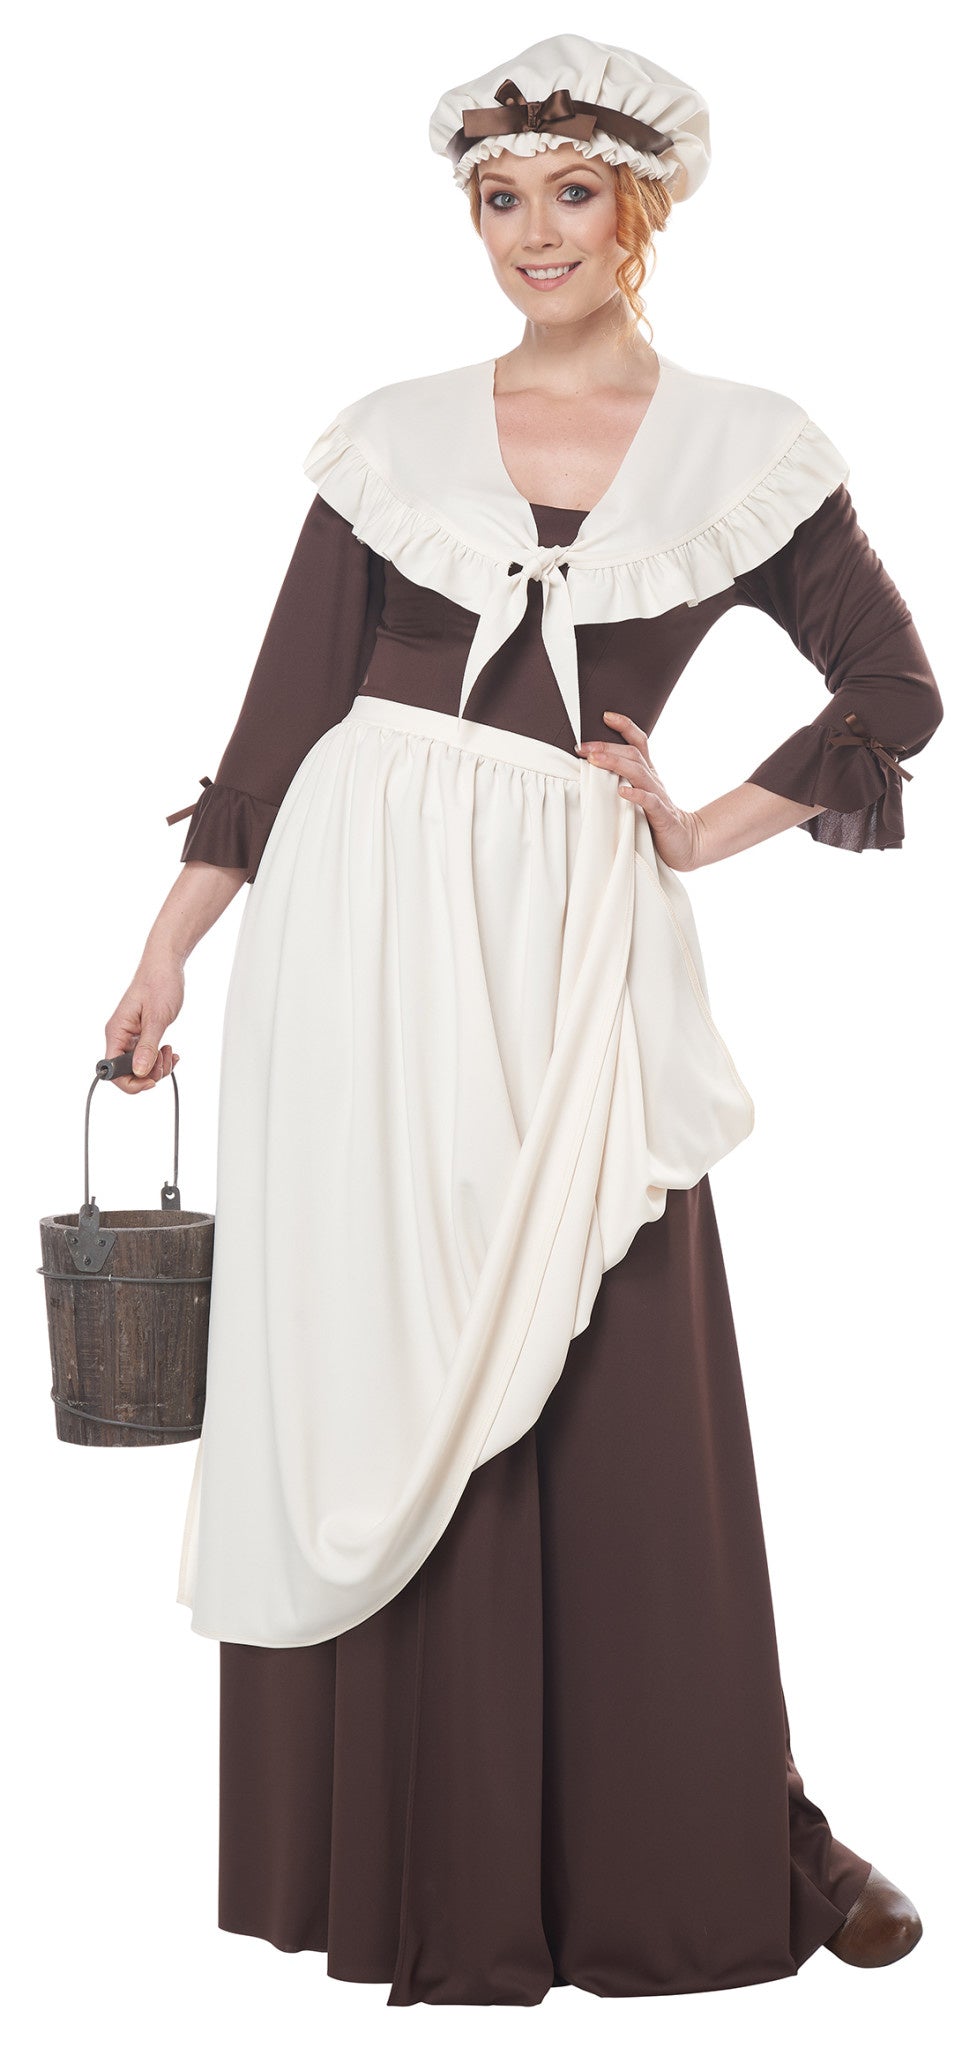 Women's Colonial Village Woman Costumes